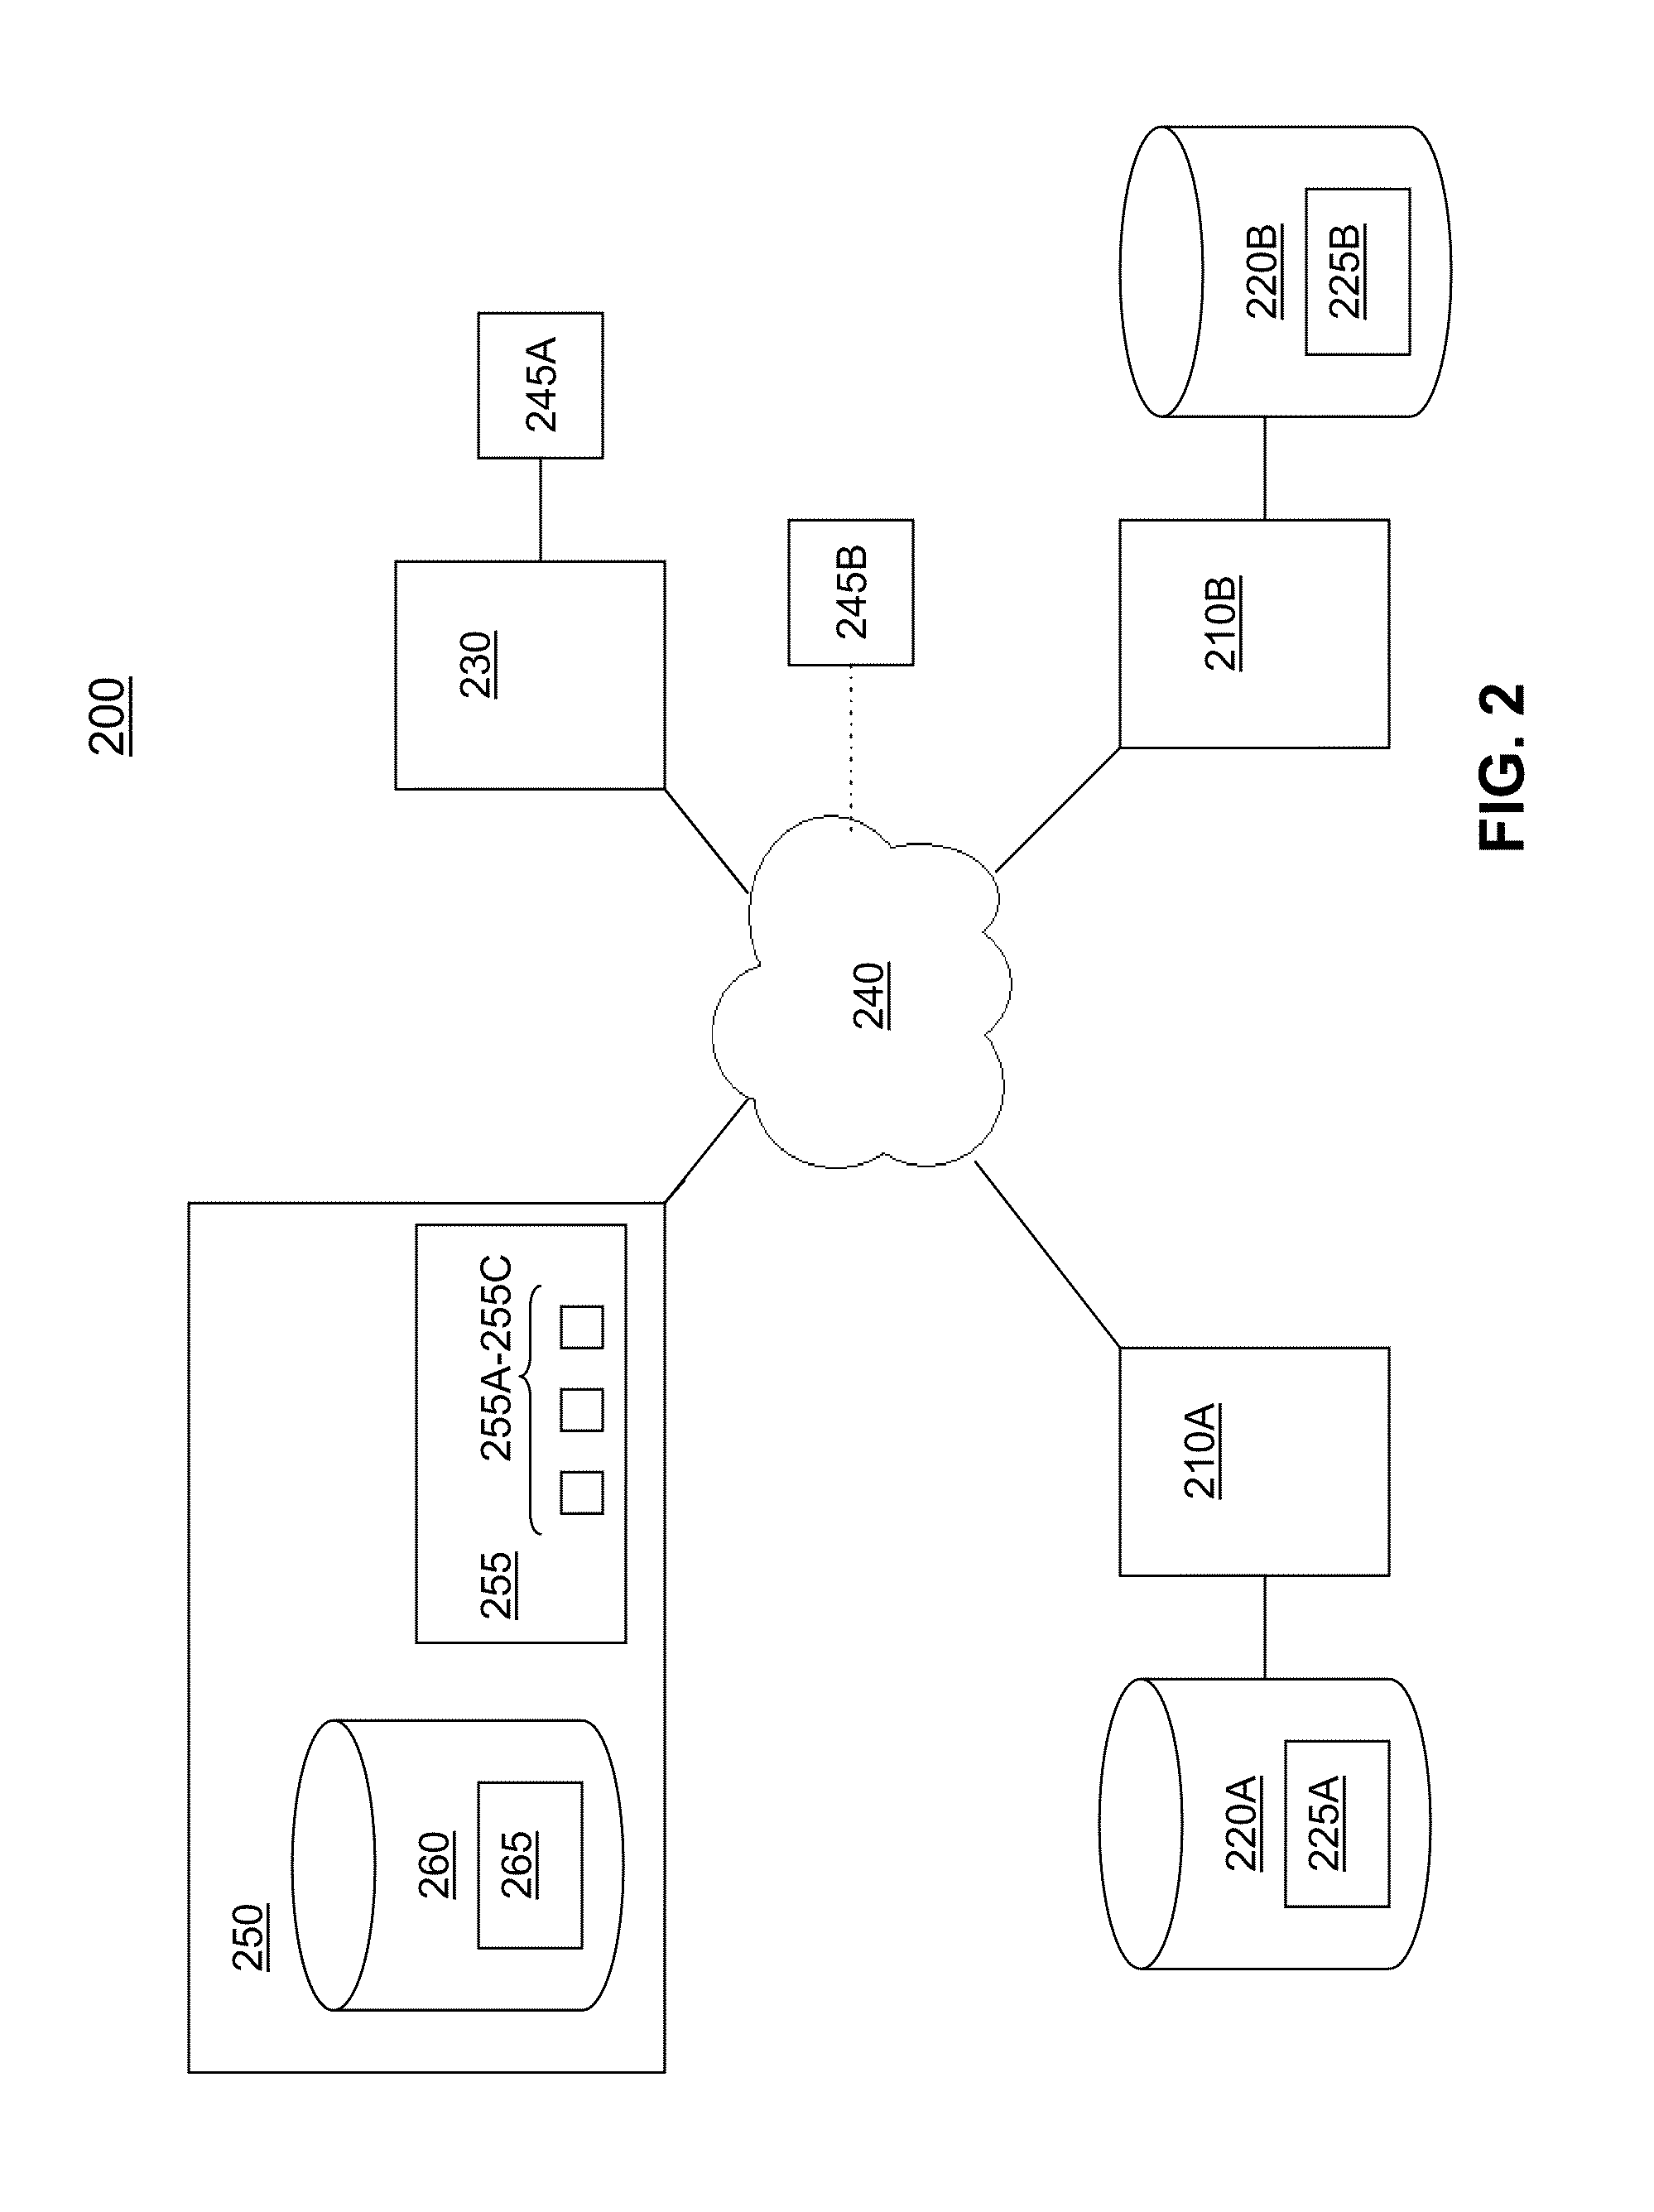 Distributed system having a shared central database